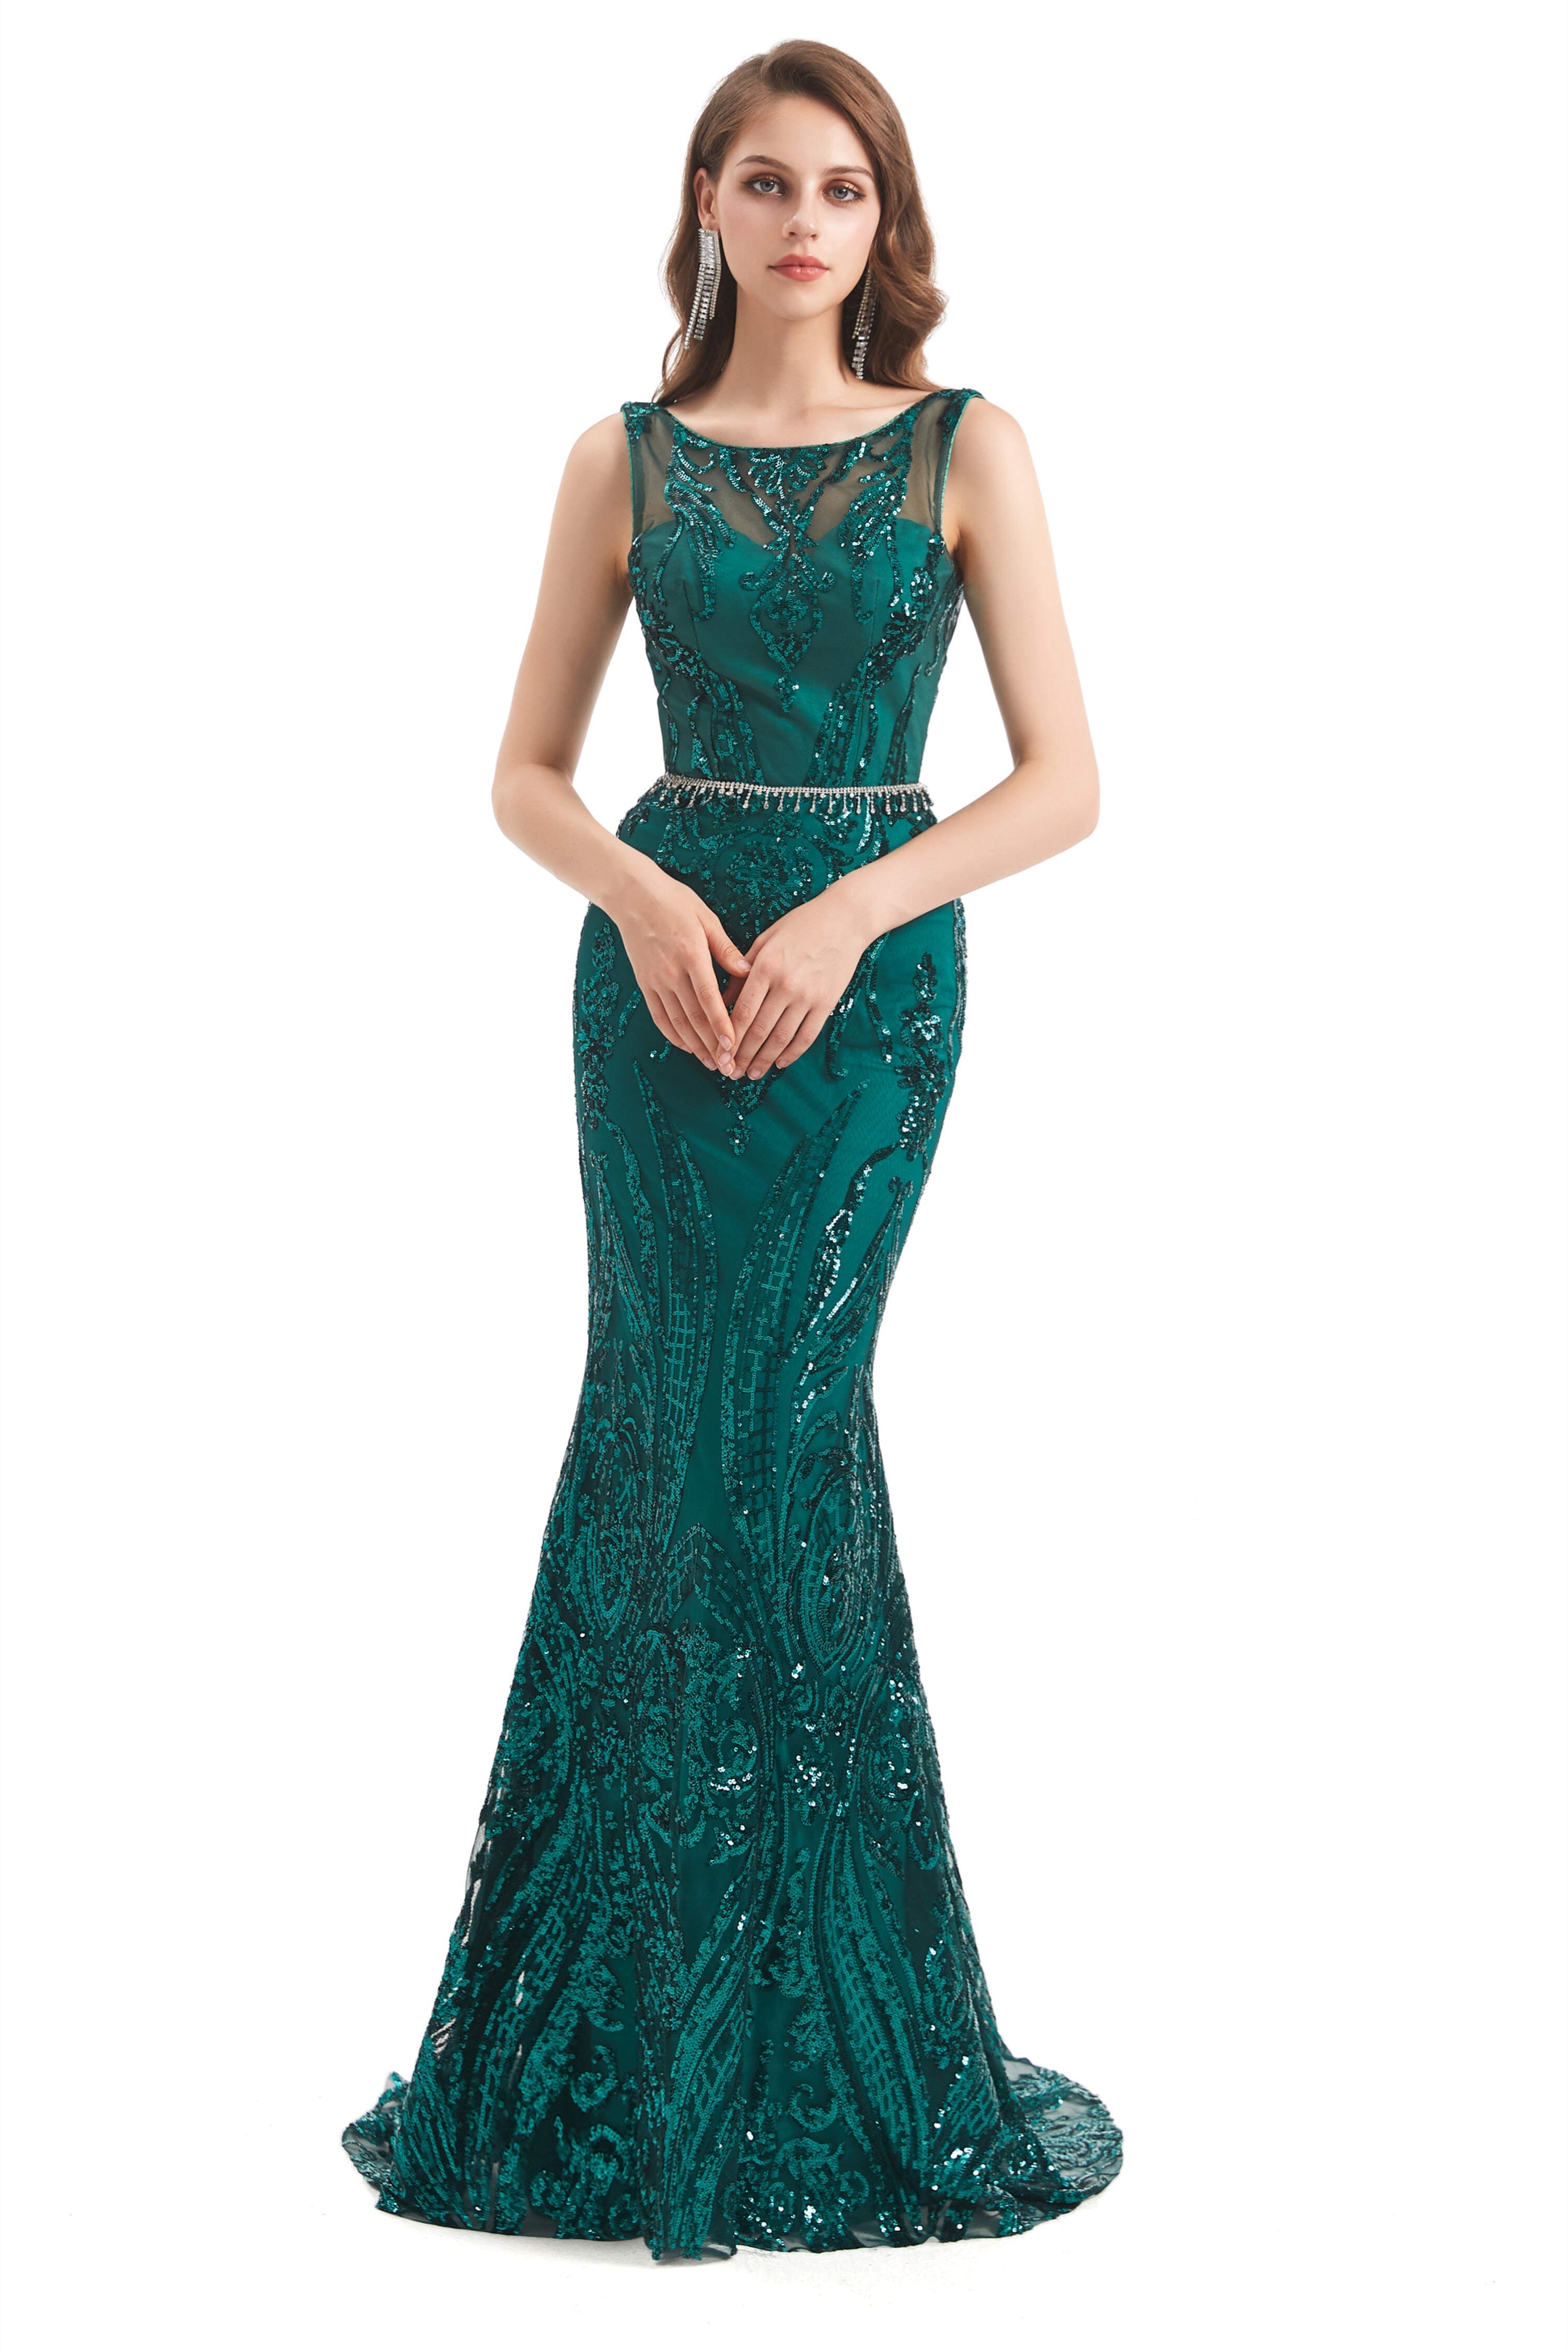 Mermaid Pattern Sleeveless Lace Corset Prom Dresses with Belt Gowns, Homecoming Dress Short Tight